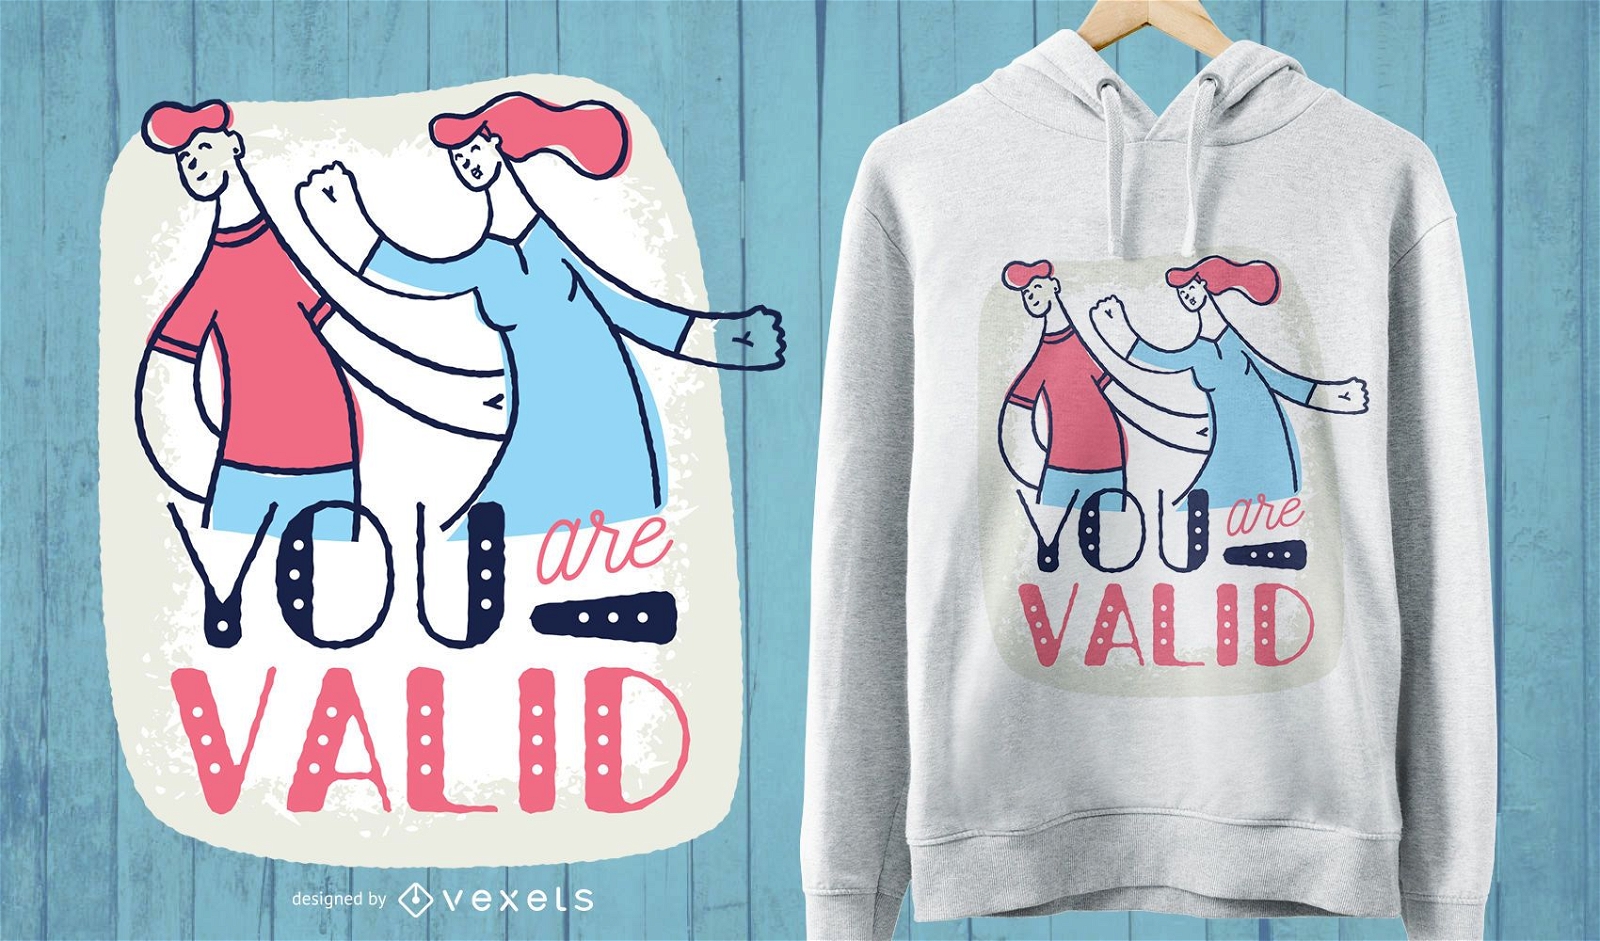 You are valid t-shirt design